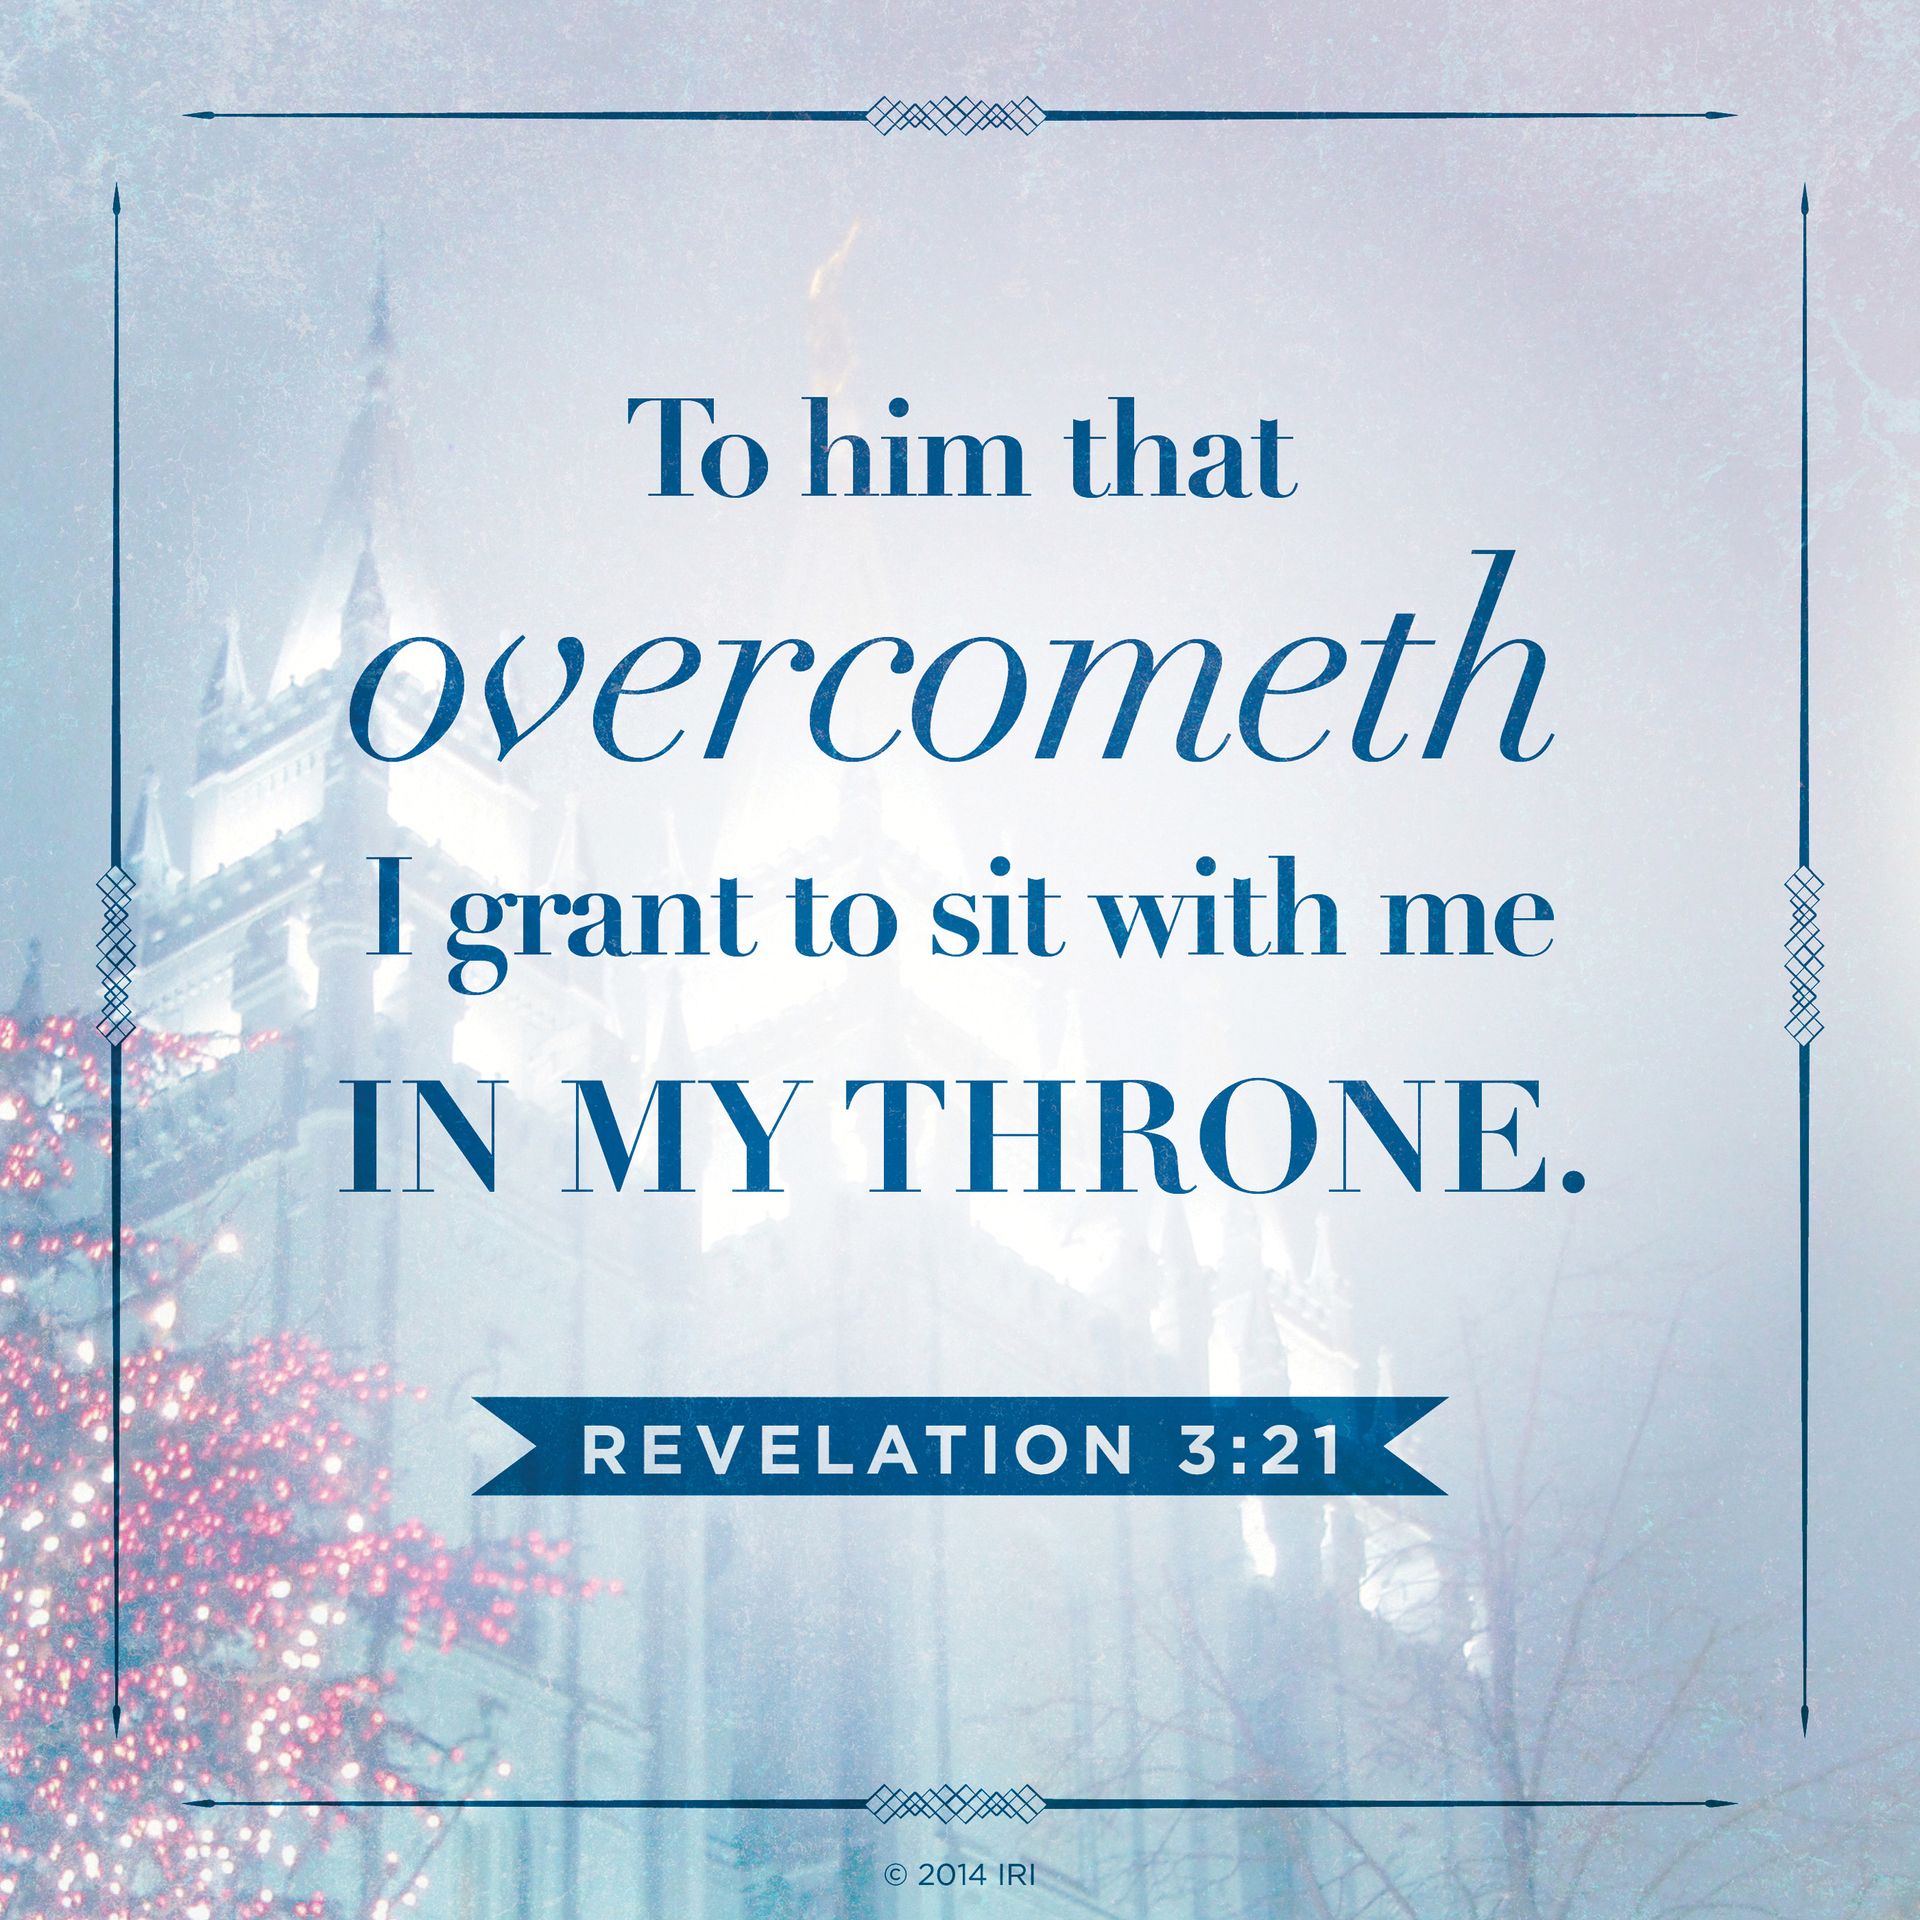 “To him that overcometh will I grant to sit with me in my throne.”—Revelation 3:21